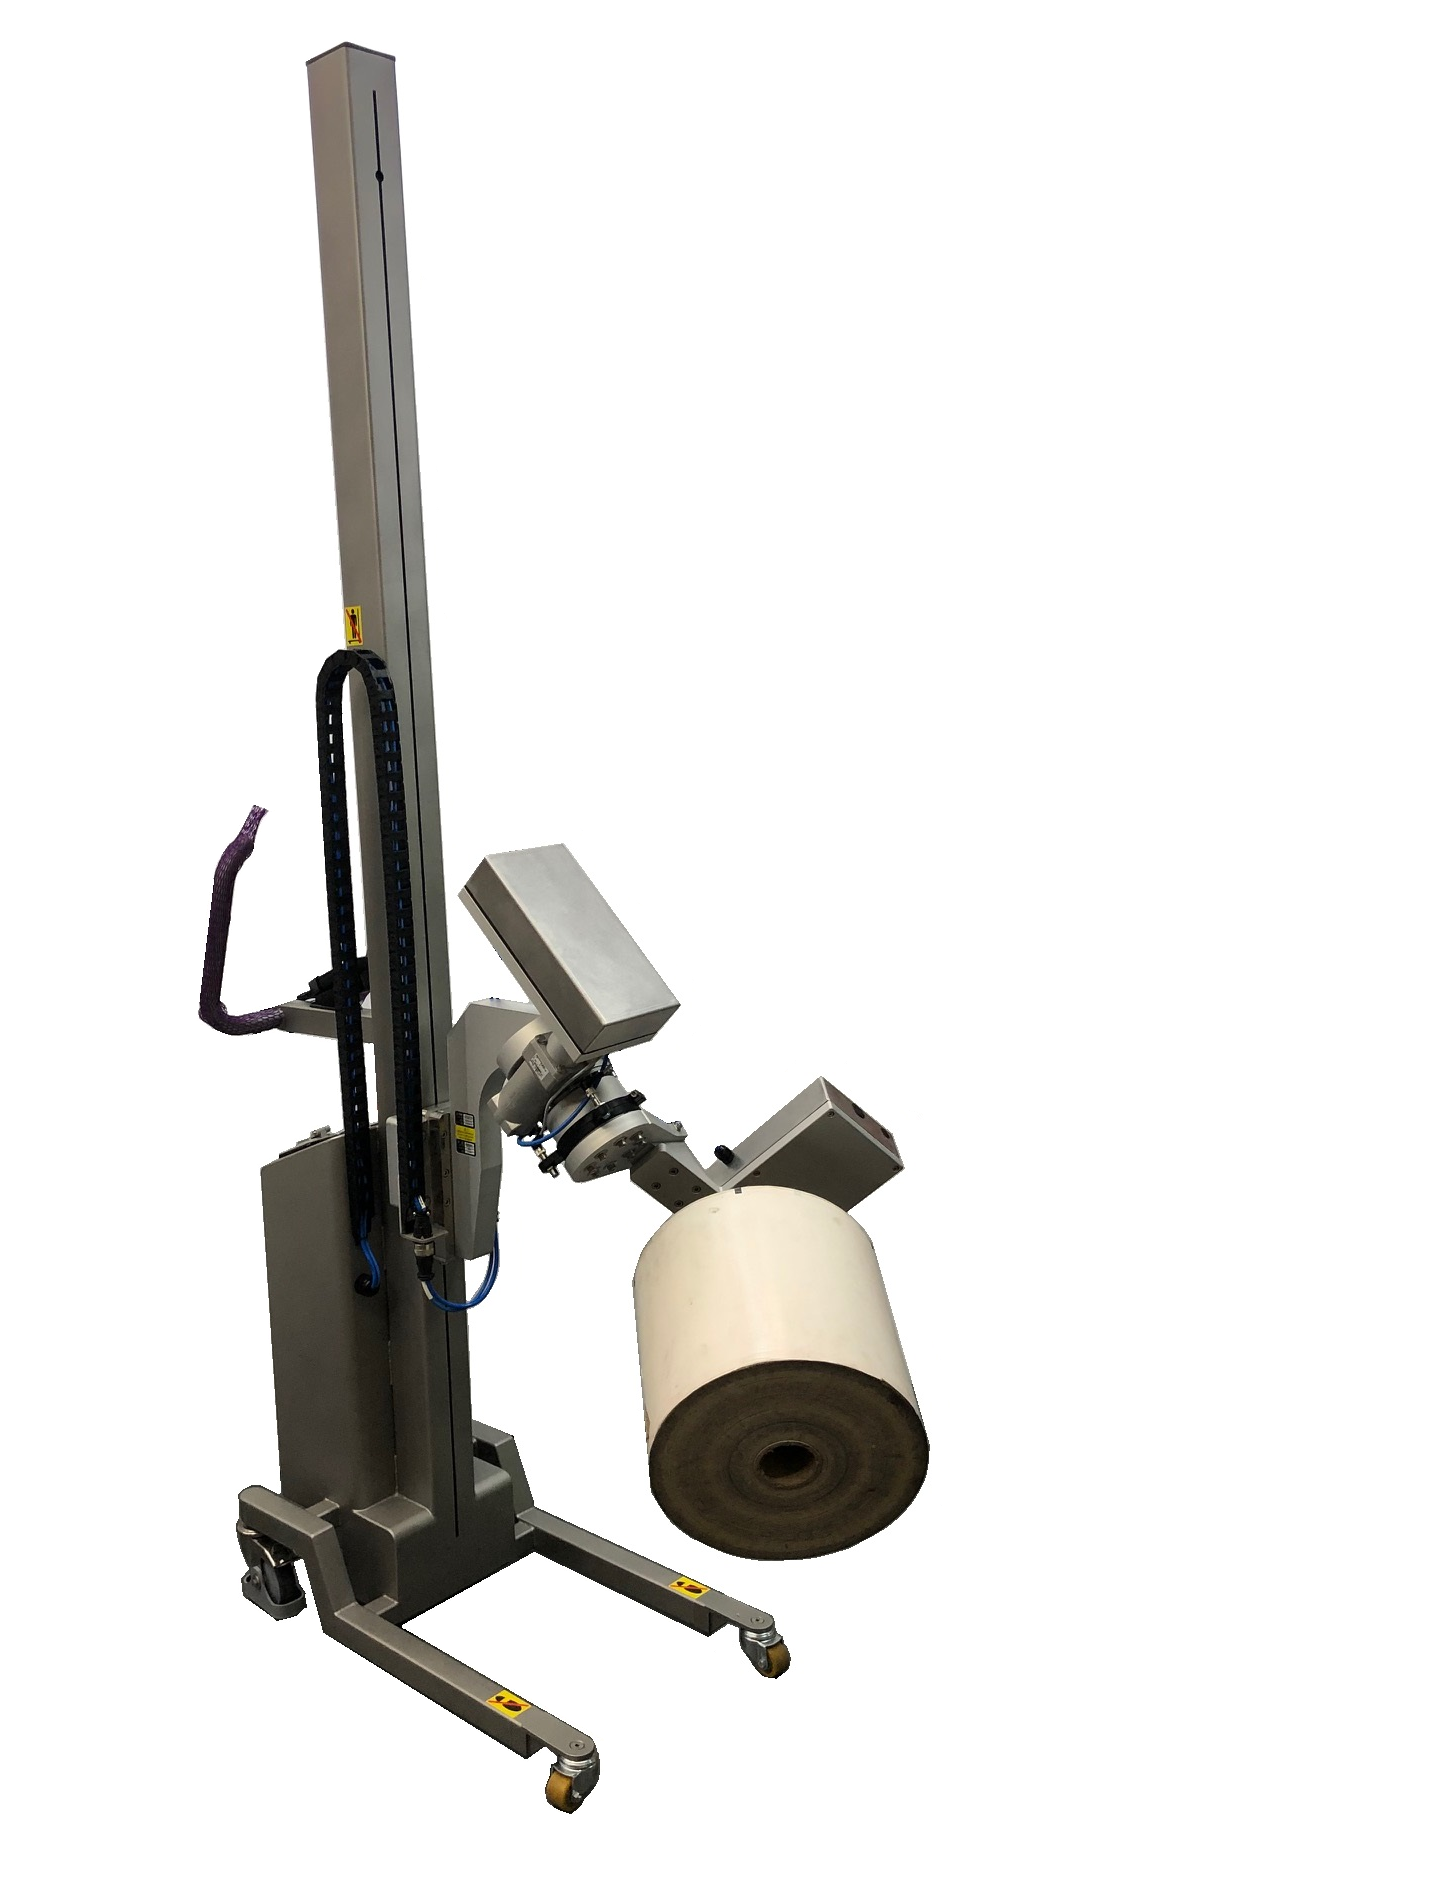 Roll Handling Equipment with fast lifting speed and high lift For Handling Rolls of Film & Foil